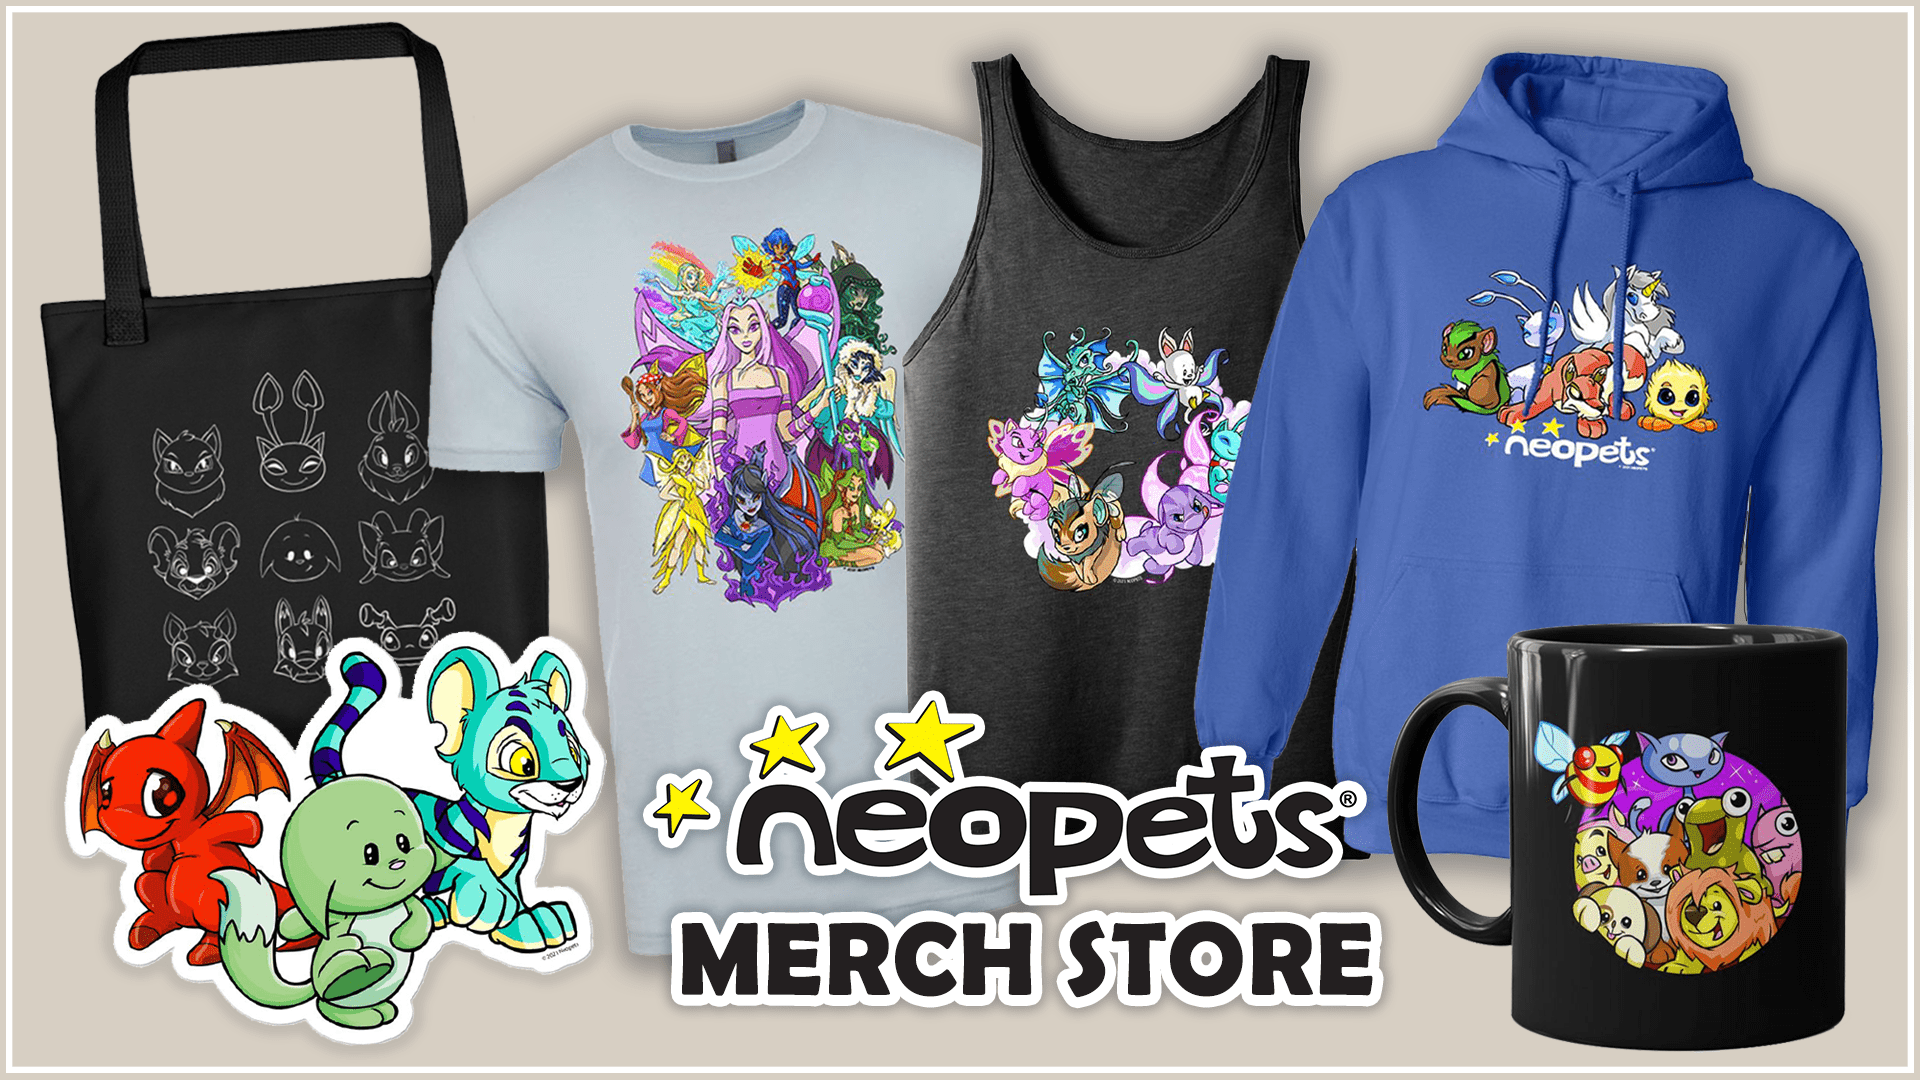 https://images.neopets.com/homepage/marquee/lincb_merchstore.png